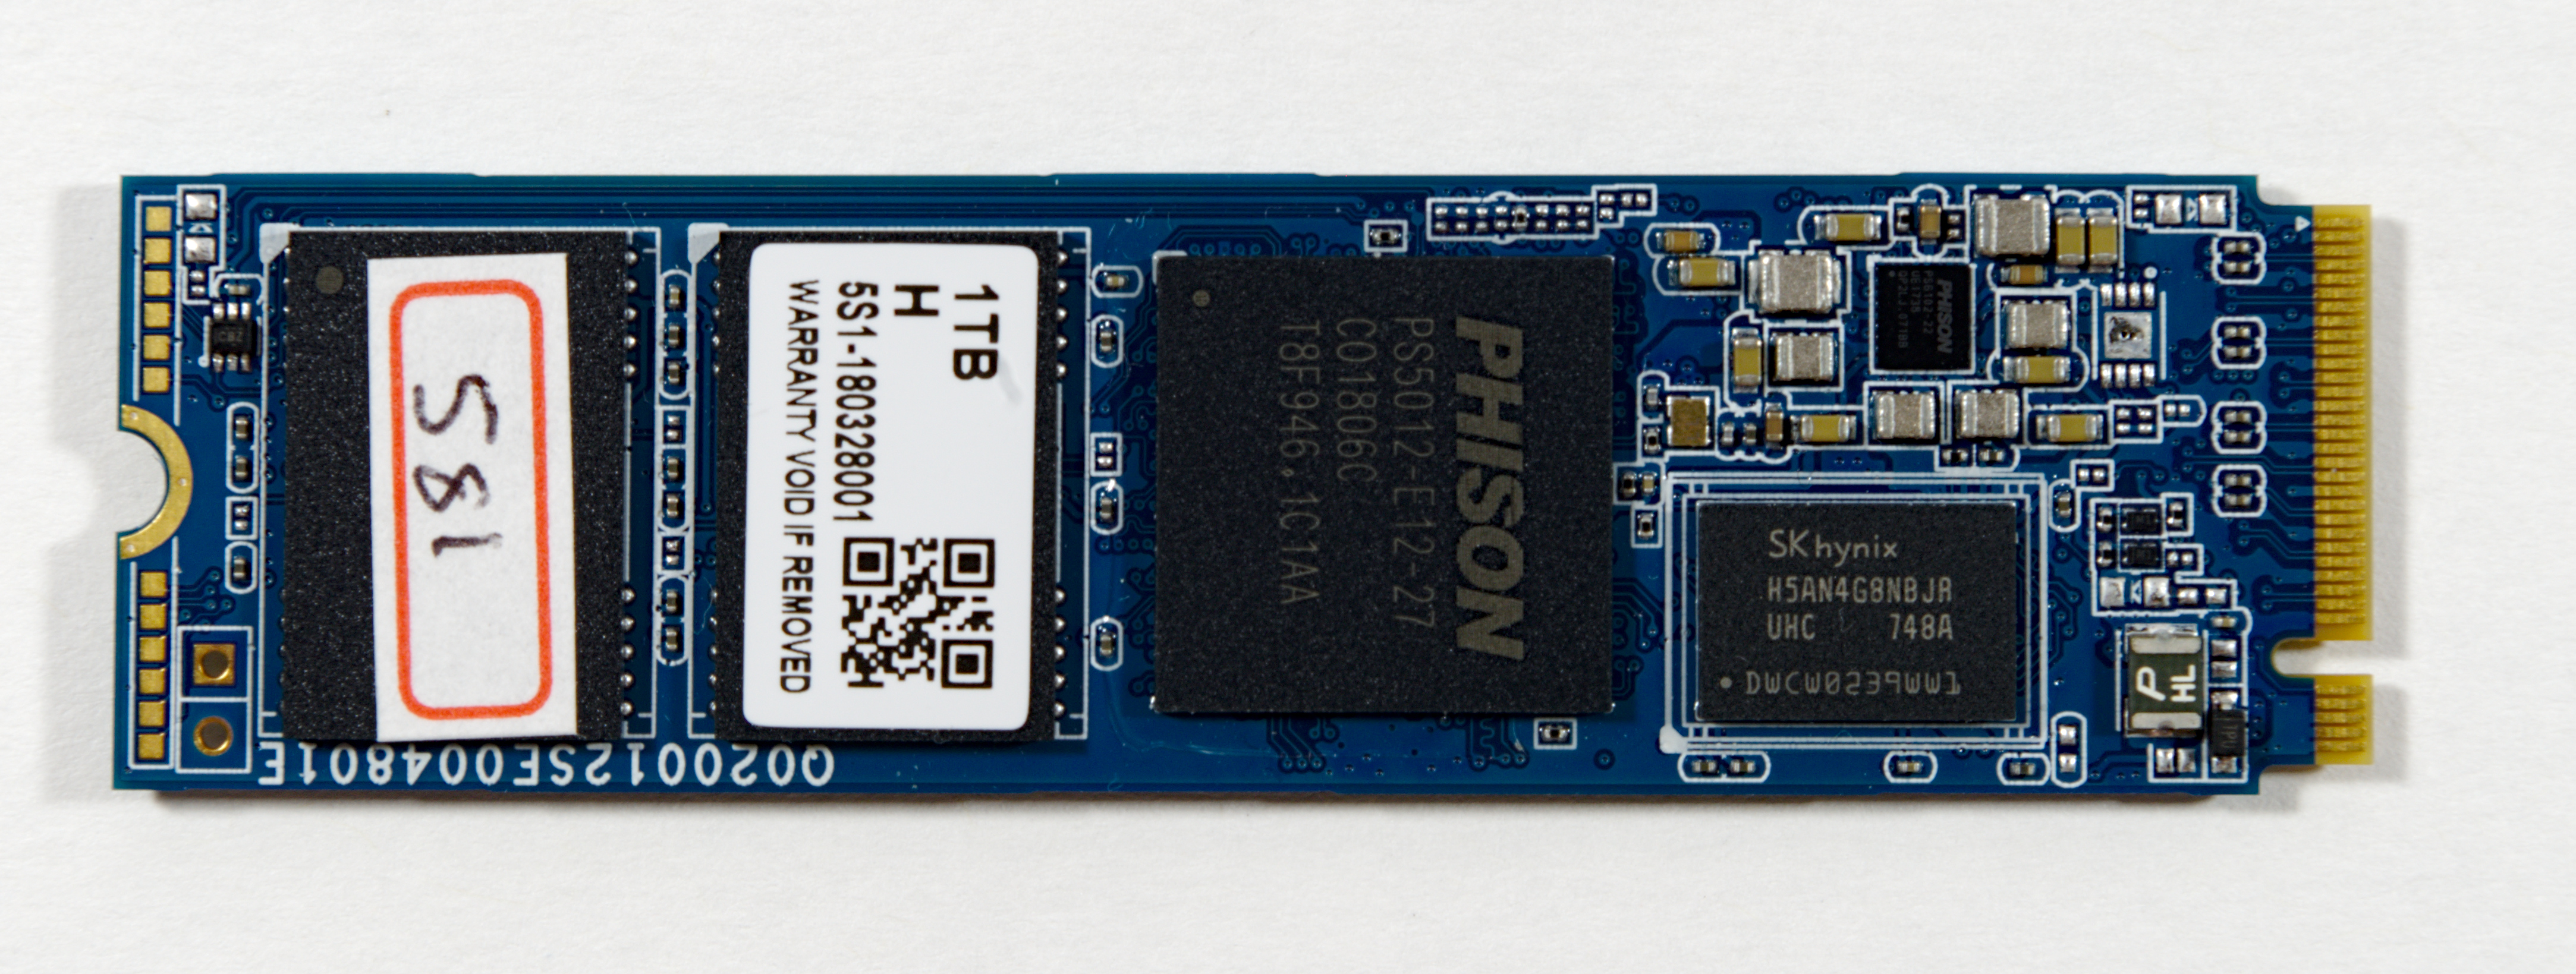 Looking Forward - The Phison E12 Reference Design Preview: A NVMe SSD Controller